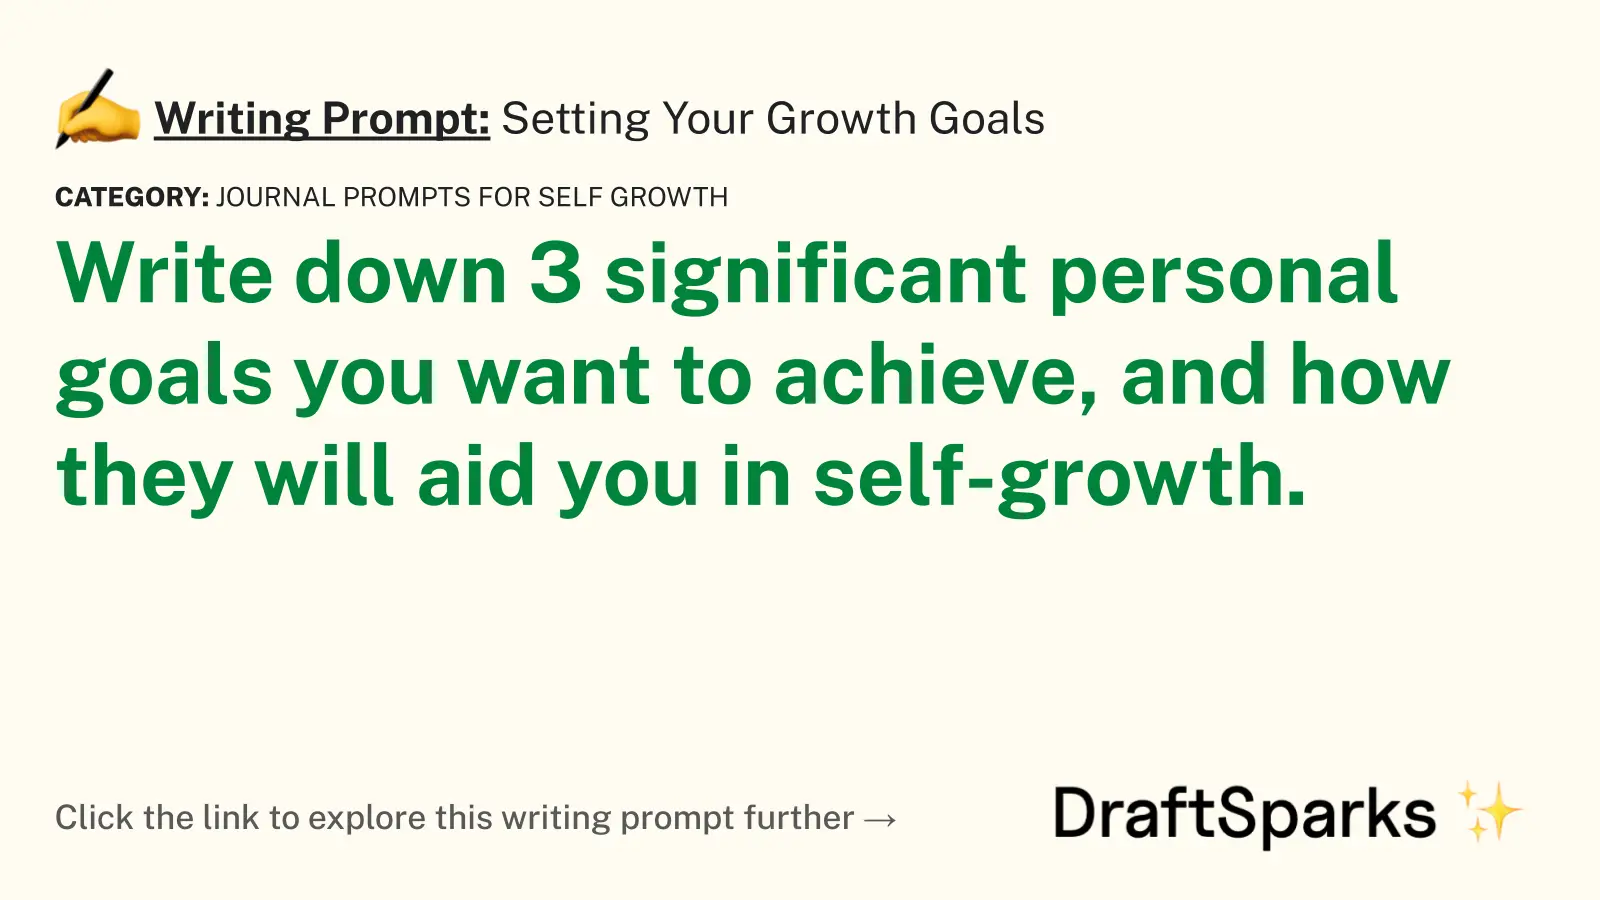 Setting Your Growth Goals